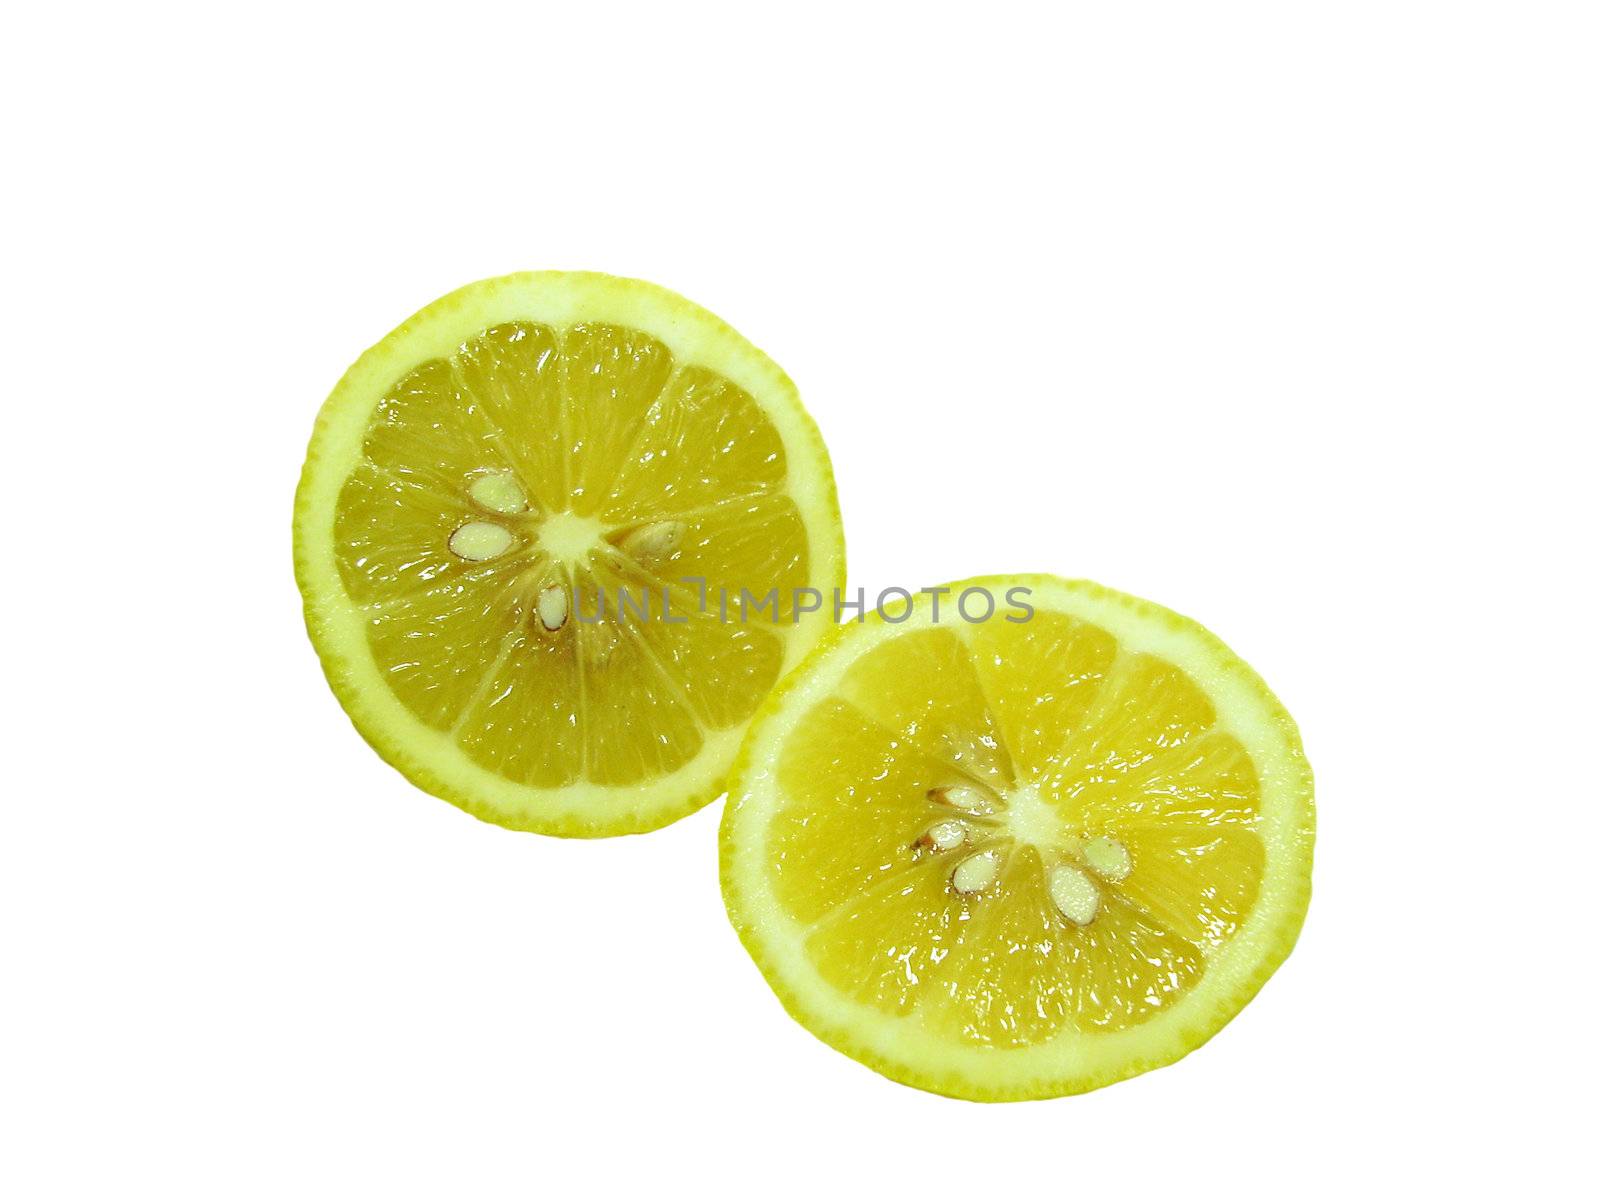 The cutted lemons isolated on white background        